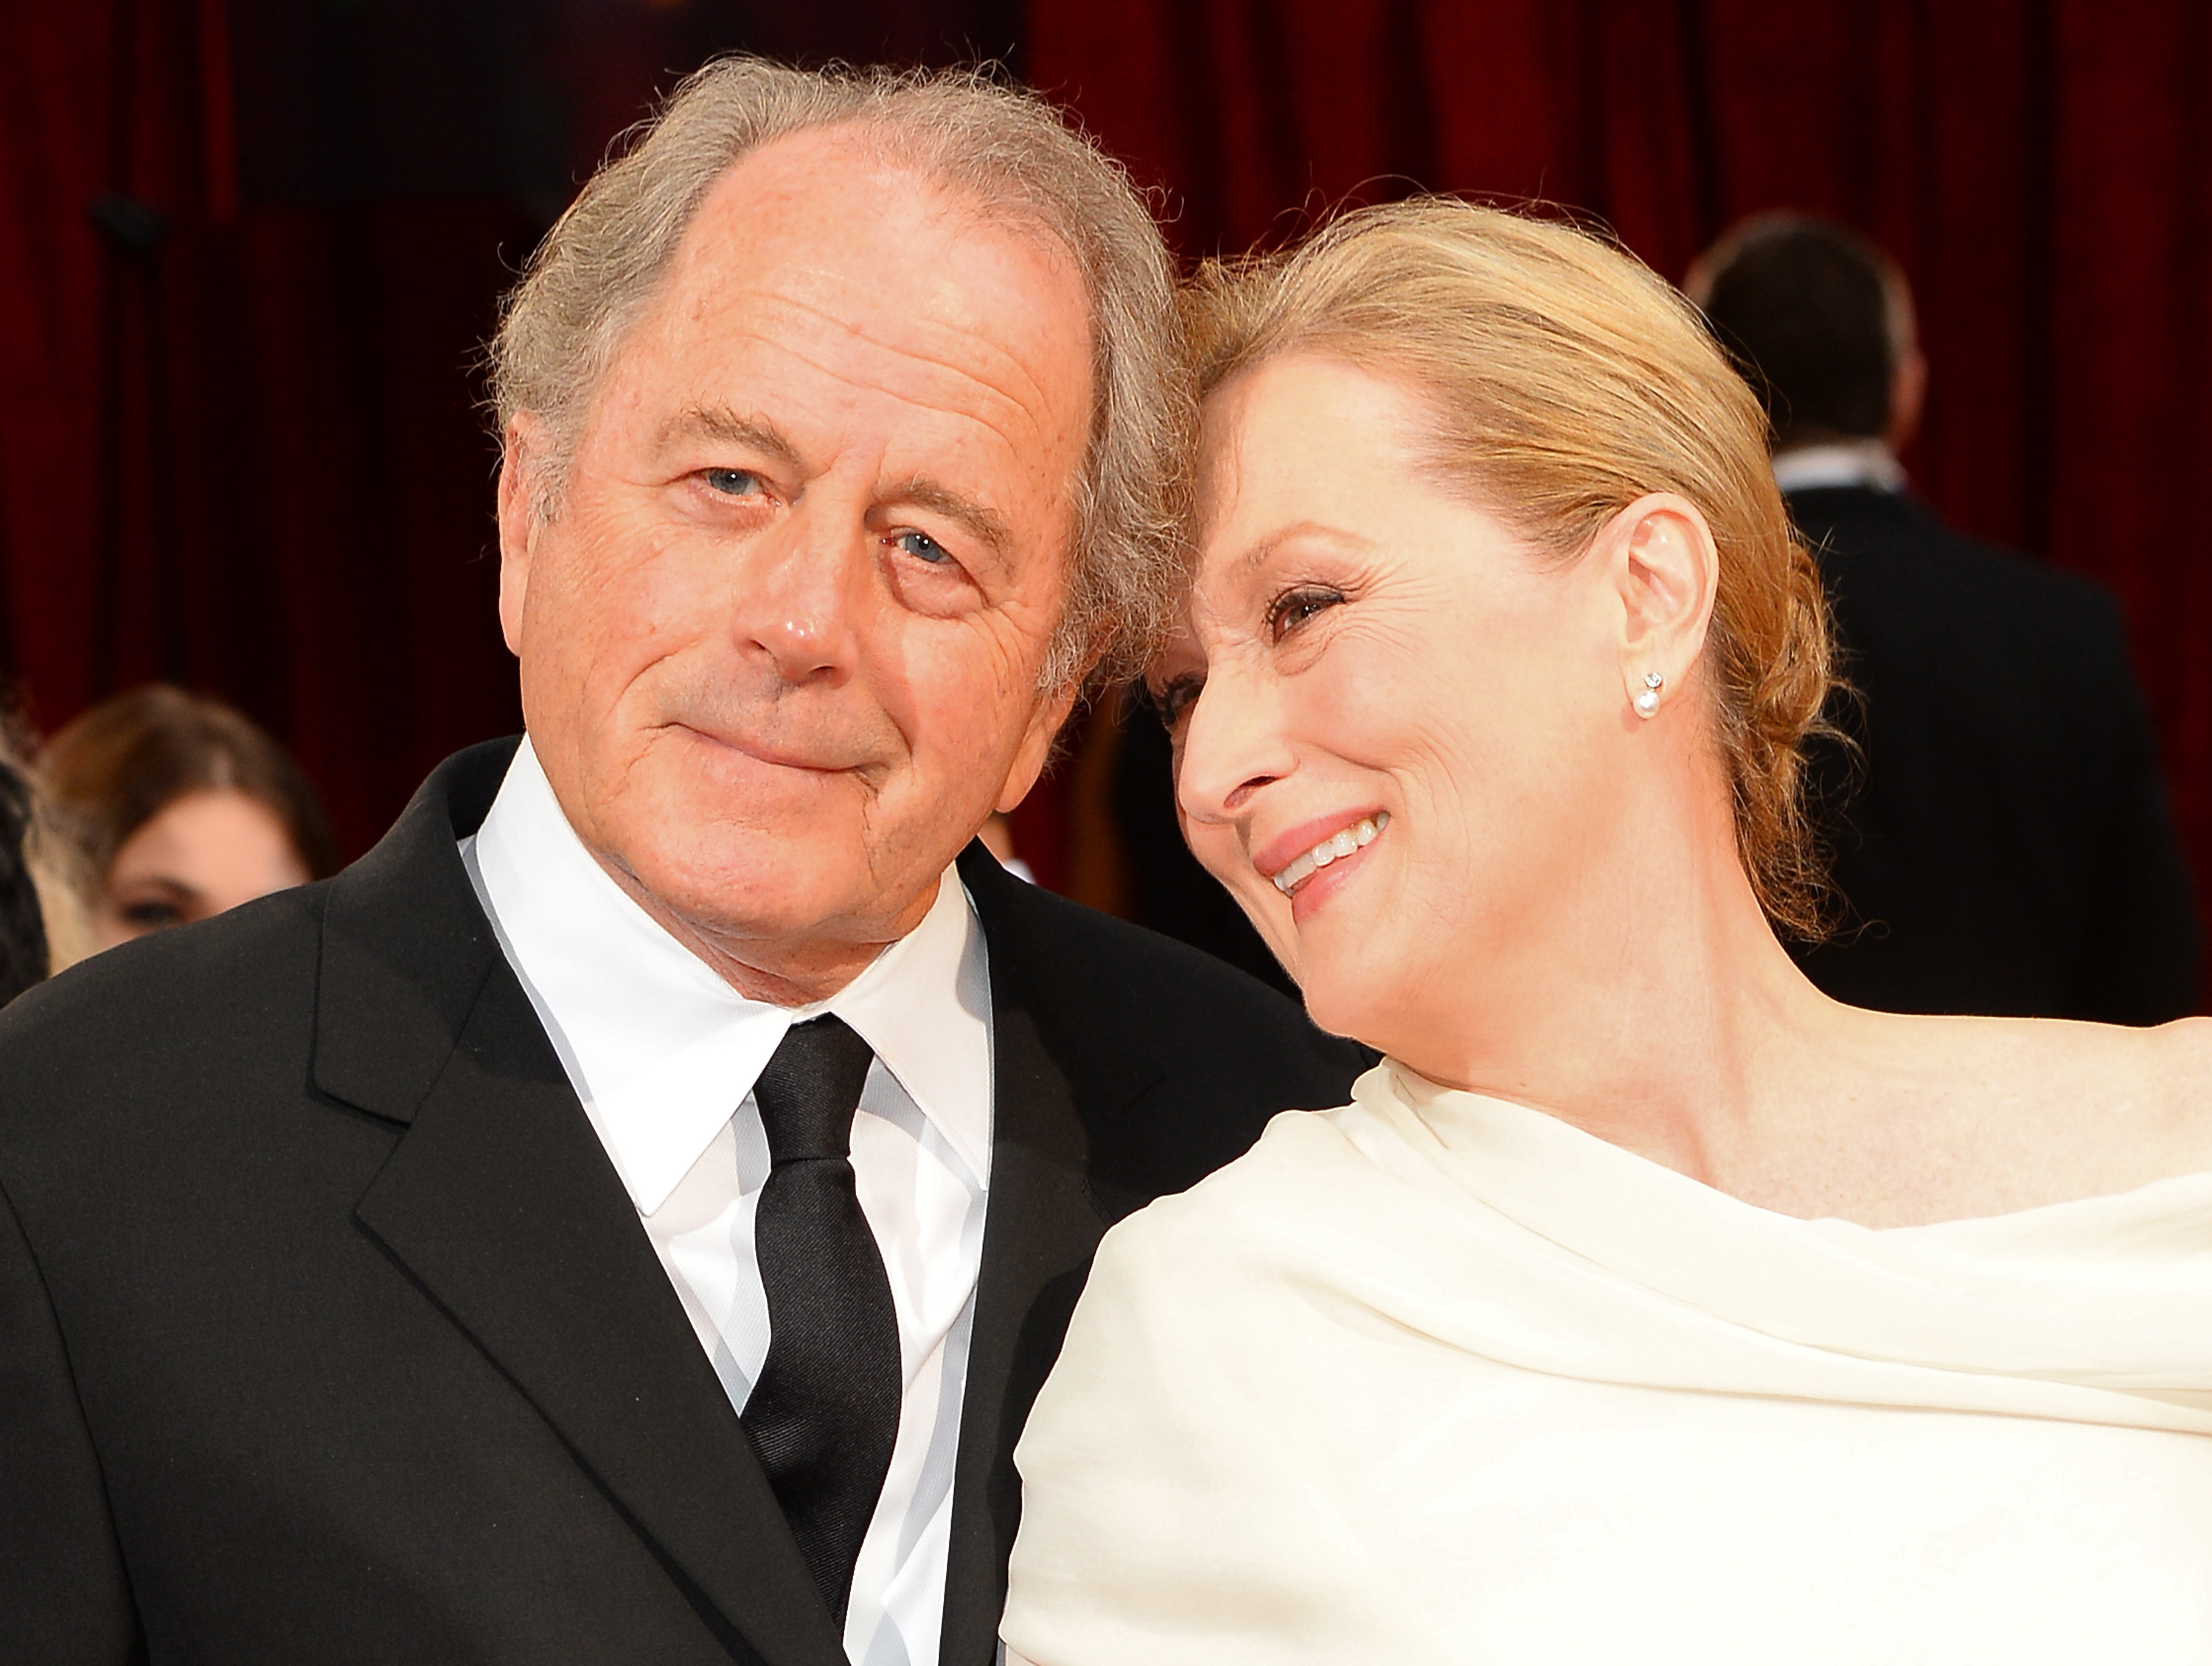 Meryl Streep and Don Gummer in Hollywood, California on March 2, 2014 | Source: Getty Images